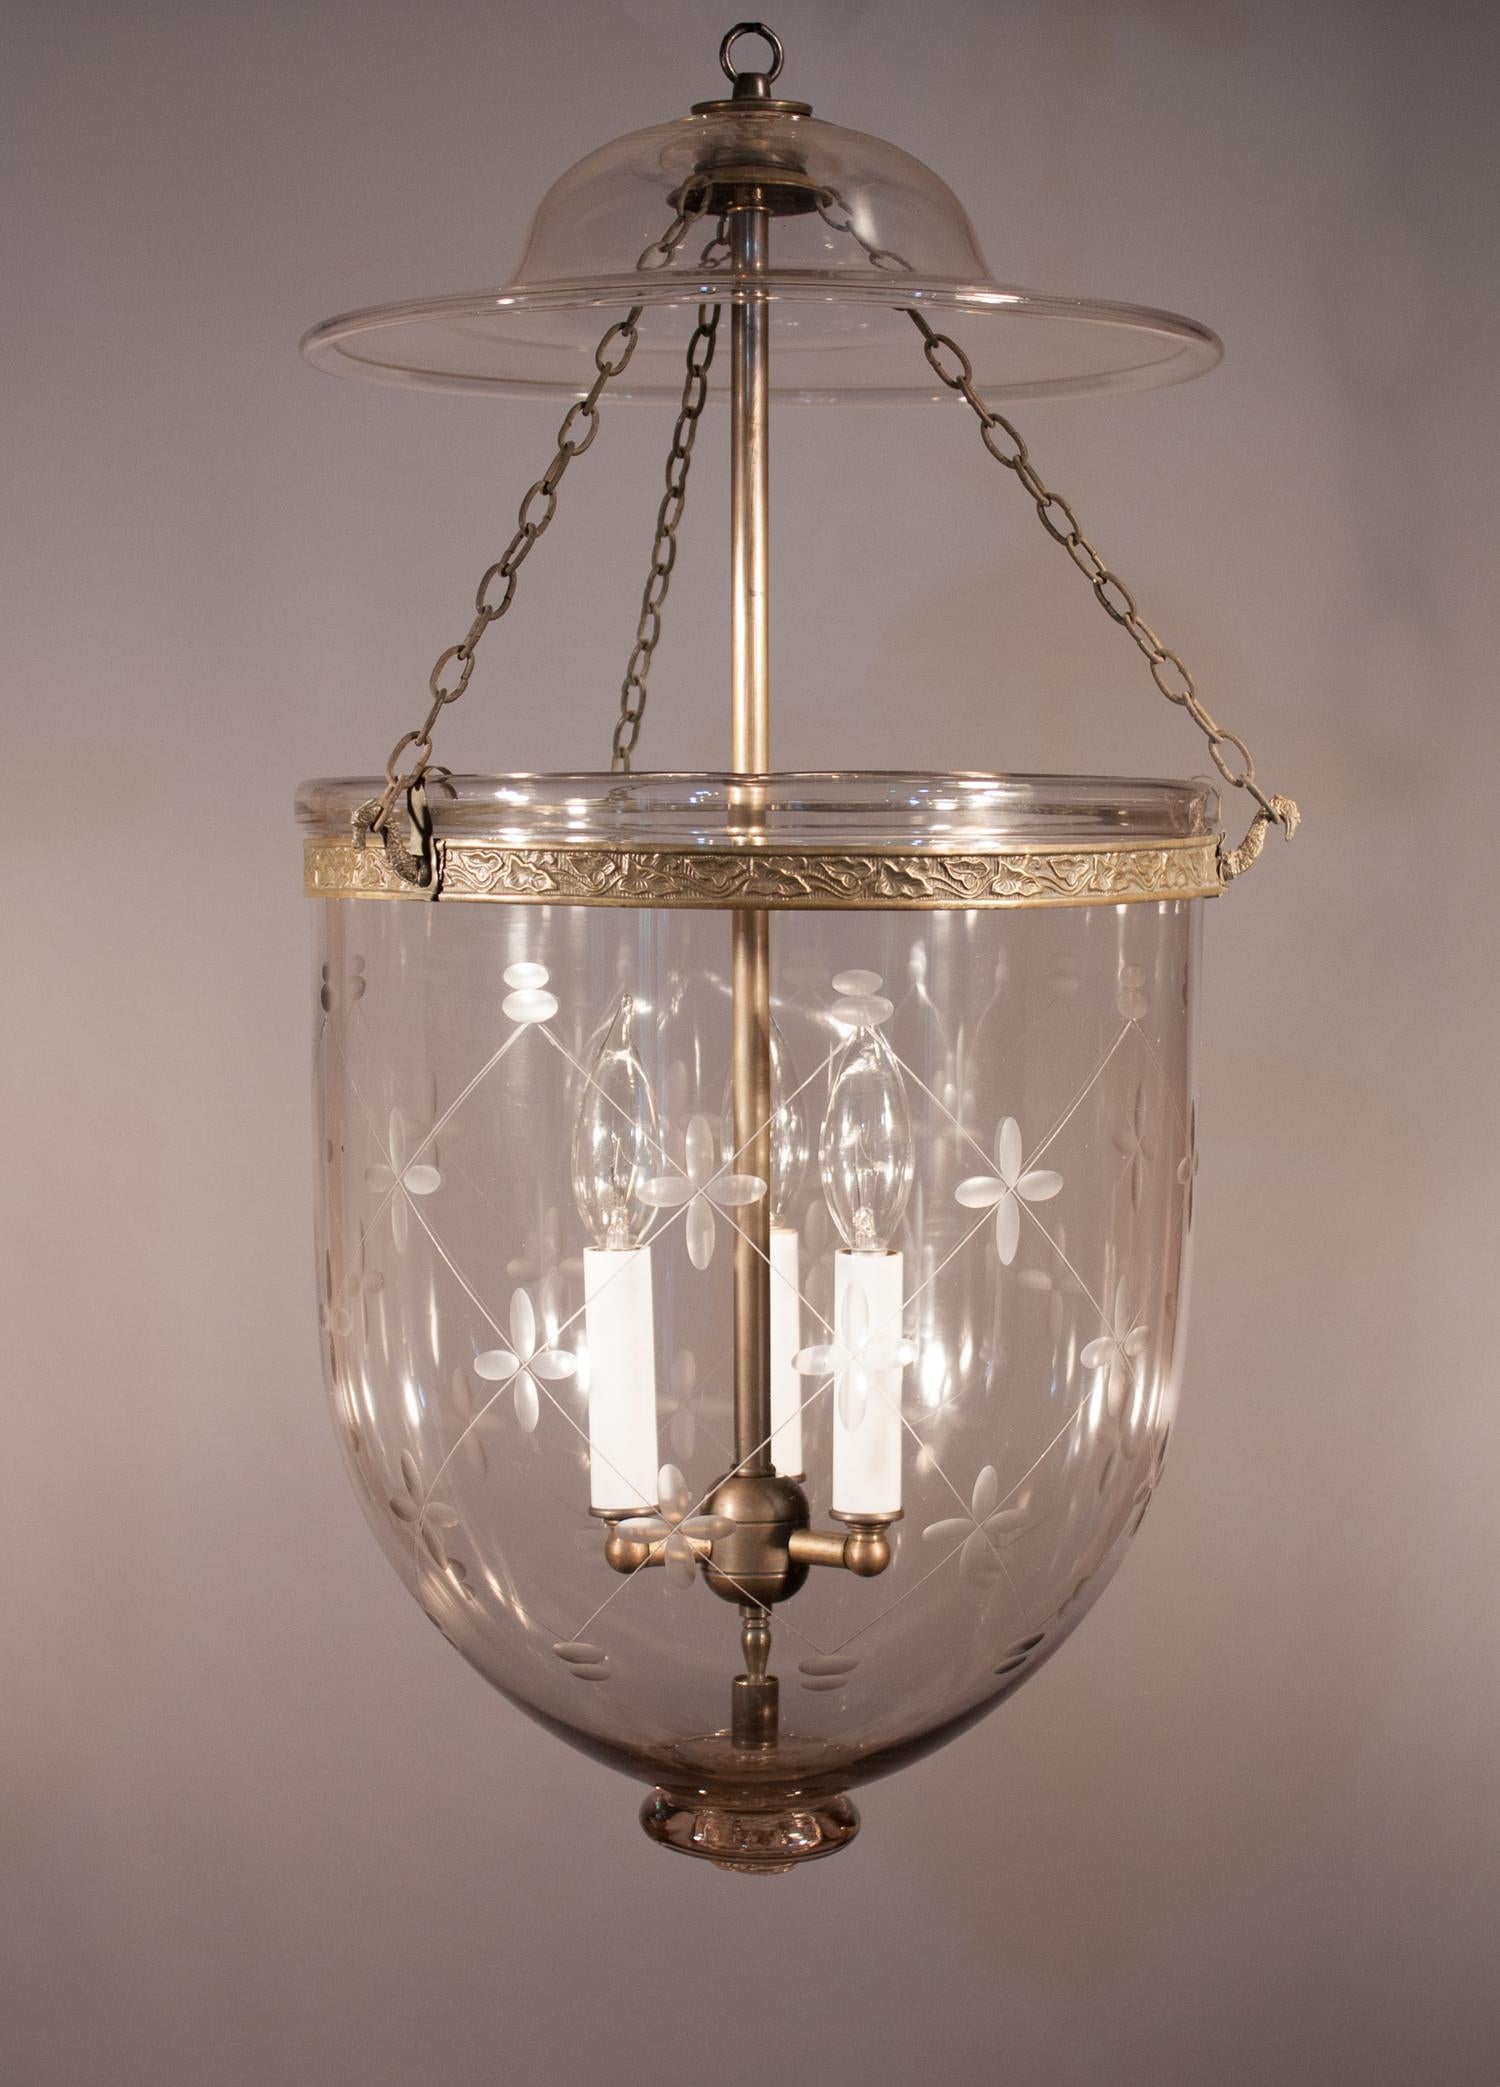 An exceptional quality hand blown glass antique bell jar lantern with its original bell-shaped smoke lid. The pendant's brass band, which has an embossed vine design, has been replaced for safety. The larger size, full form, and character of this